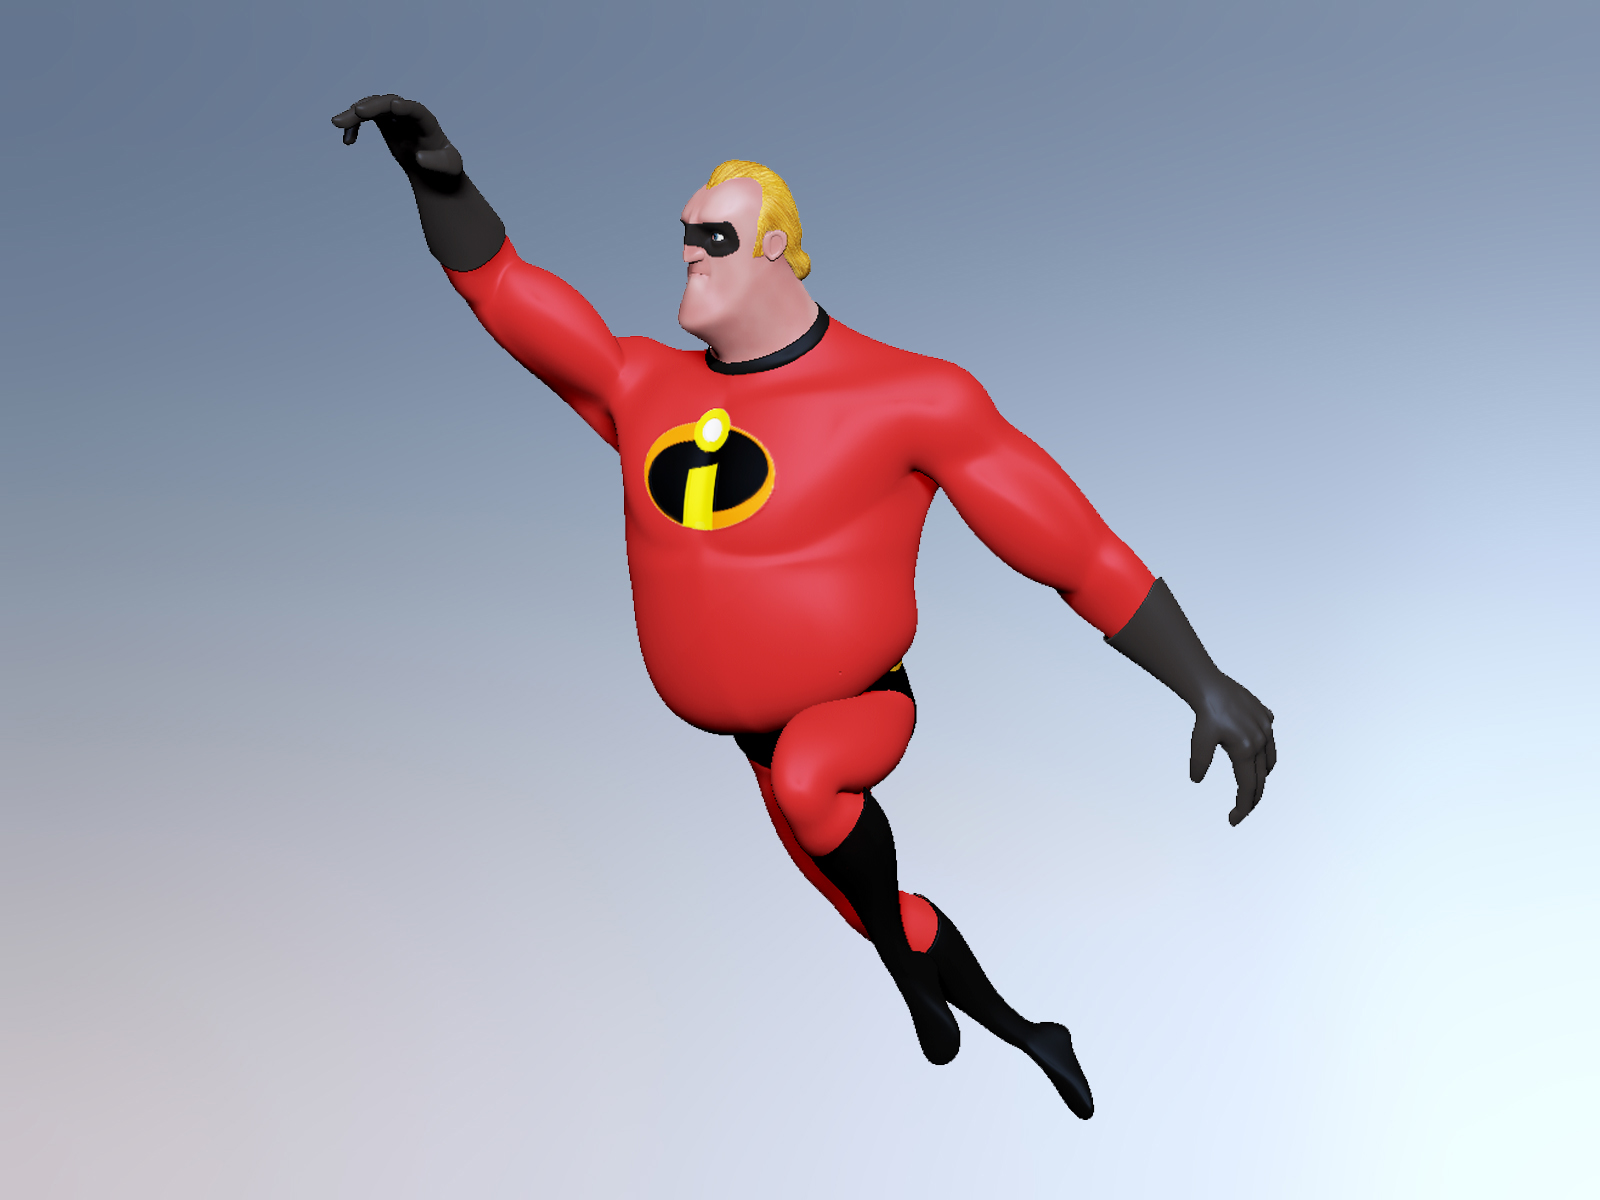 Mr Incredible Work Quotes. QuotesGram